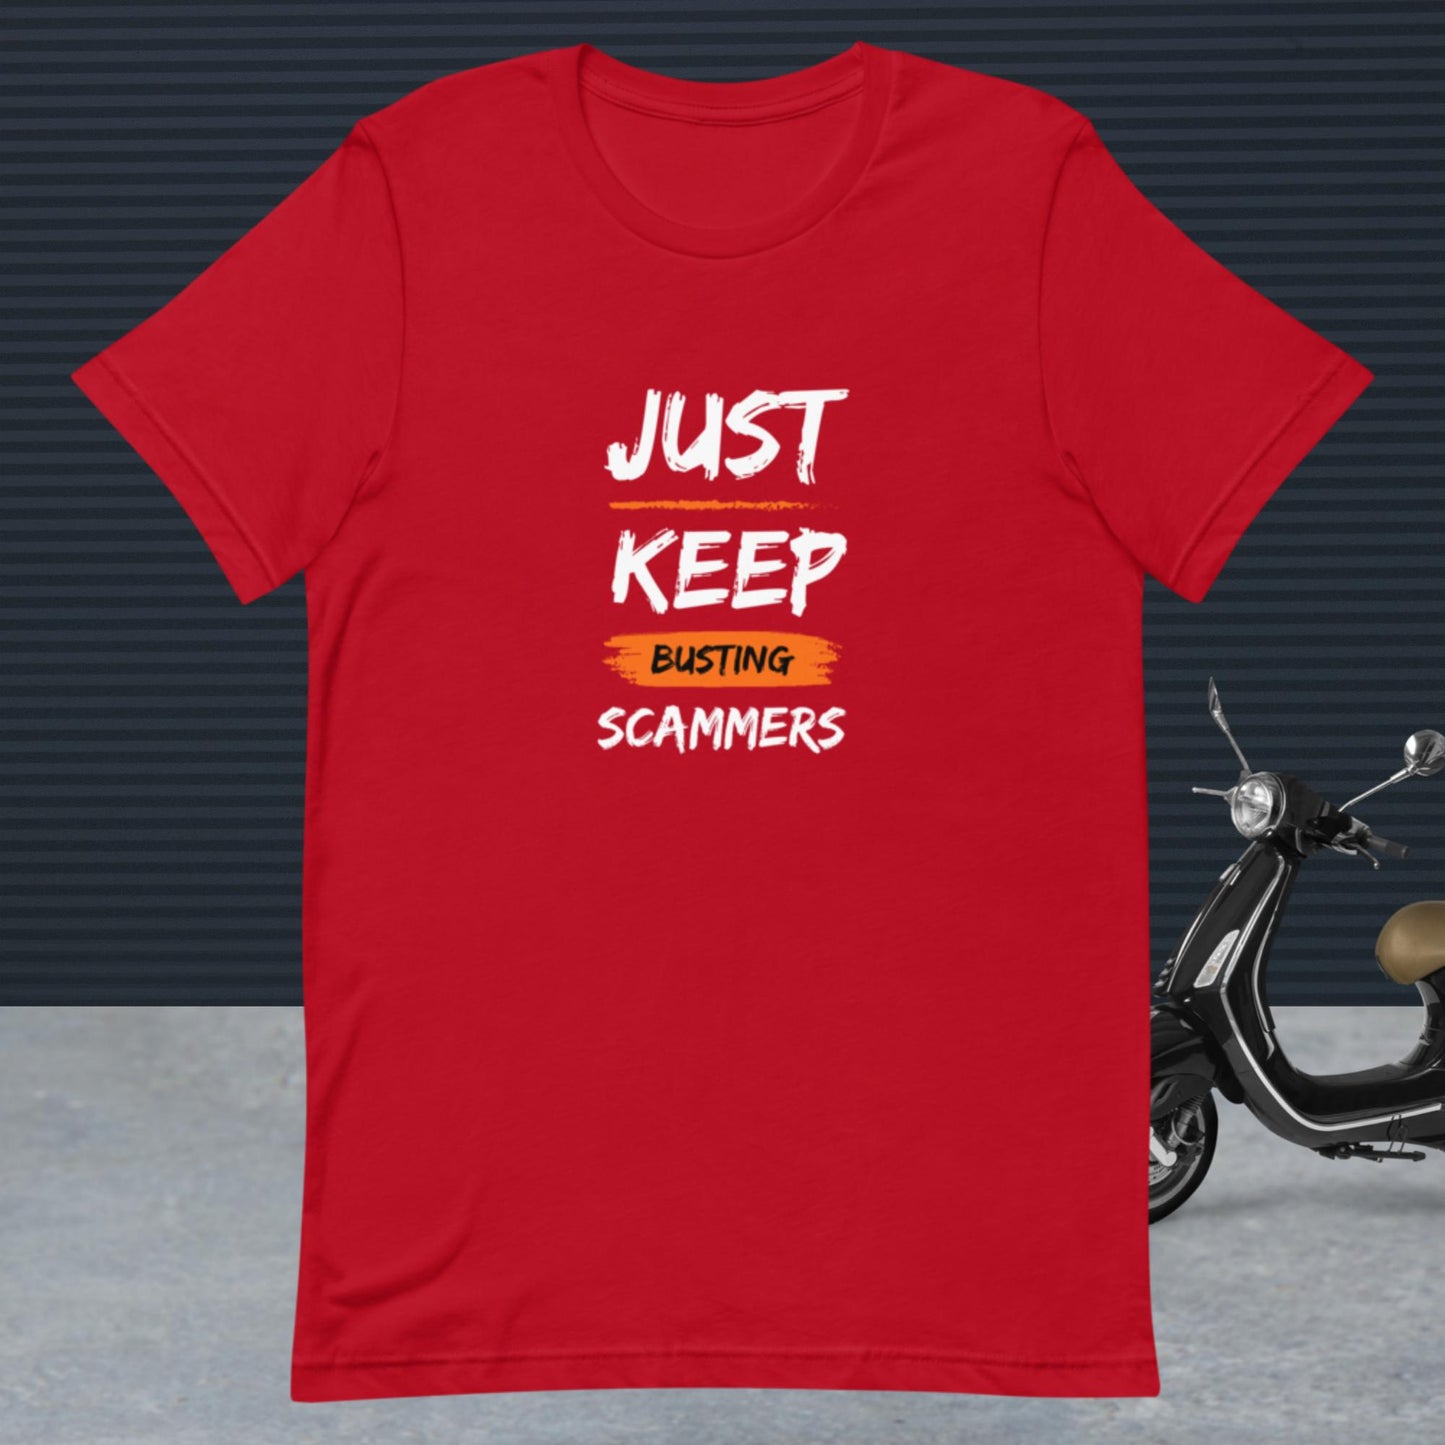 JUST KEEP BUSTING SCAMMERS | Unisex t-shirt